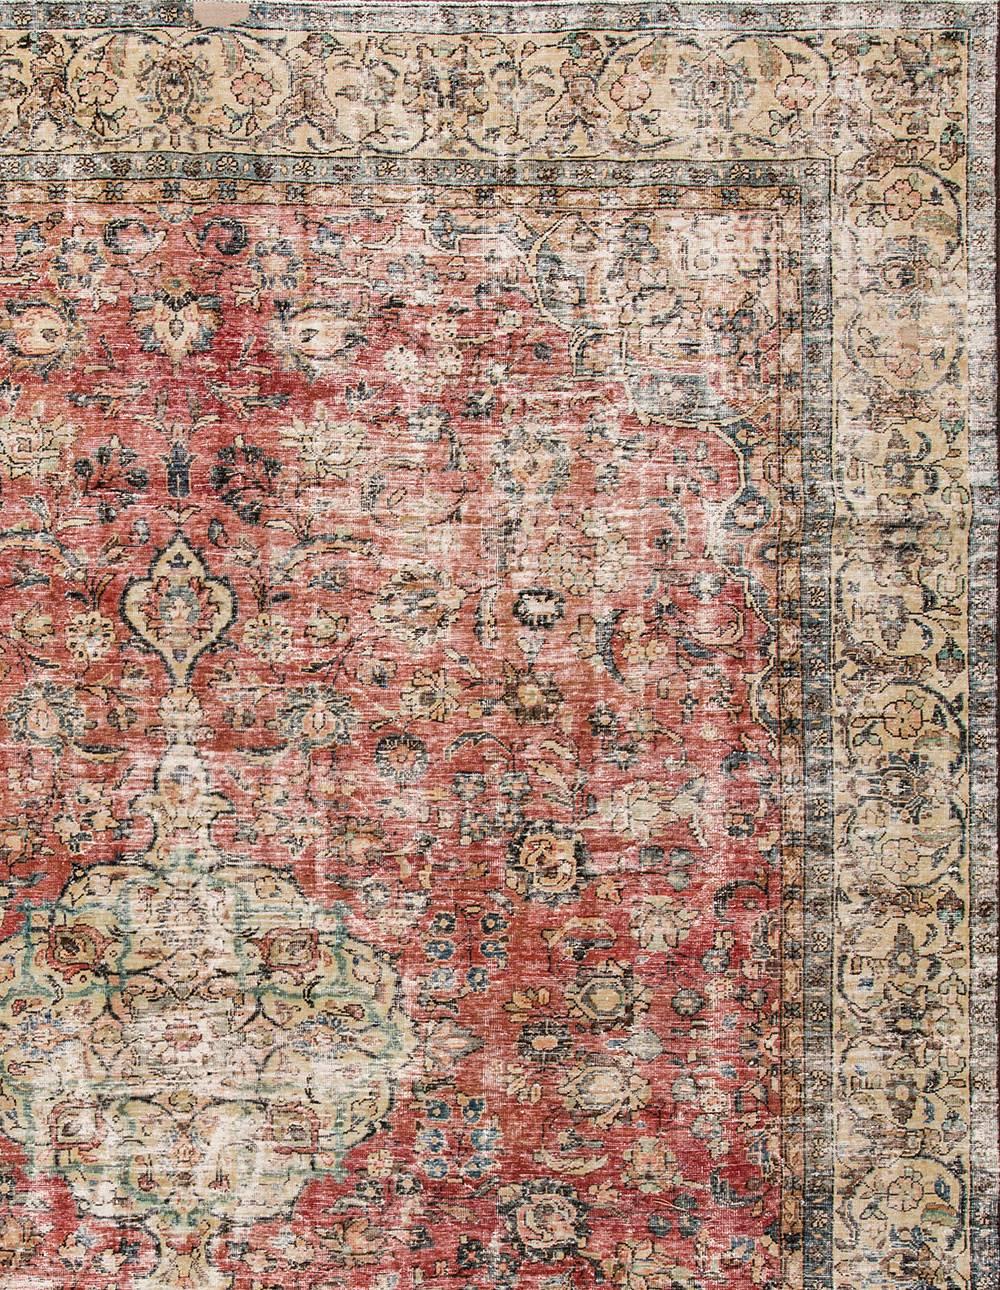 Antique hand-knotted Persian Tabriz distressed rug with a subtle all-over motif. This rug measures 11'10